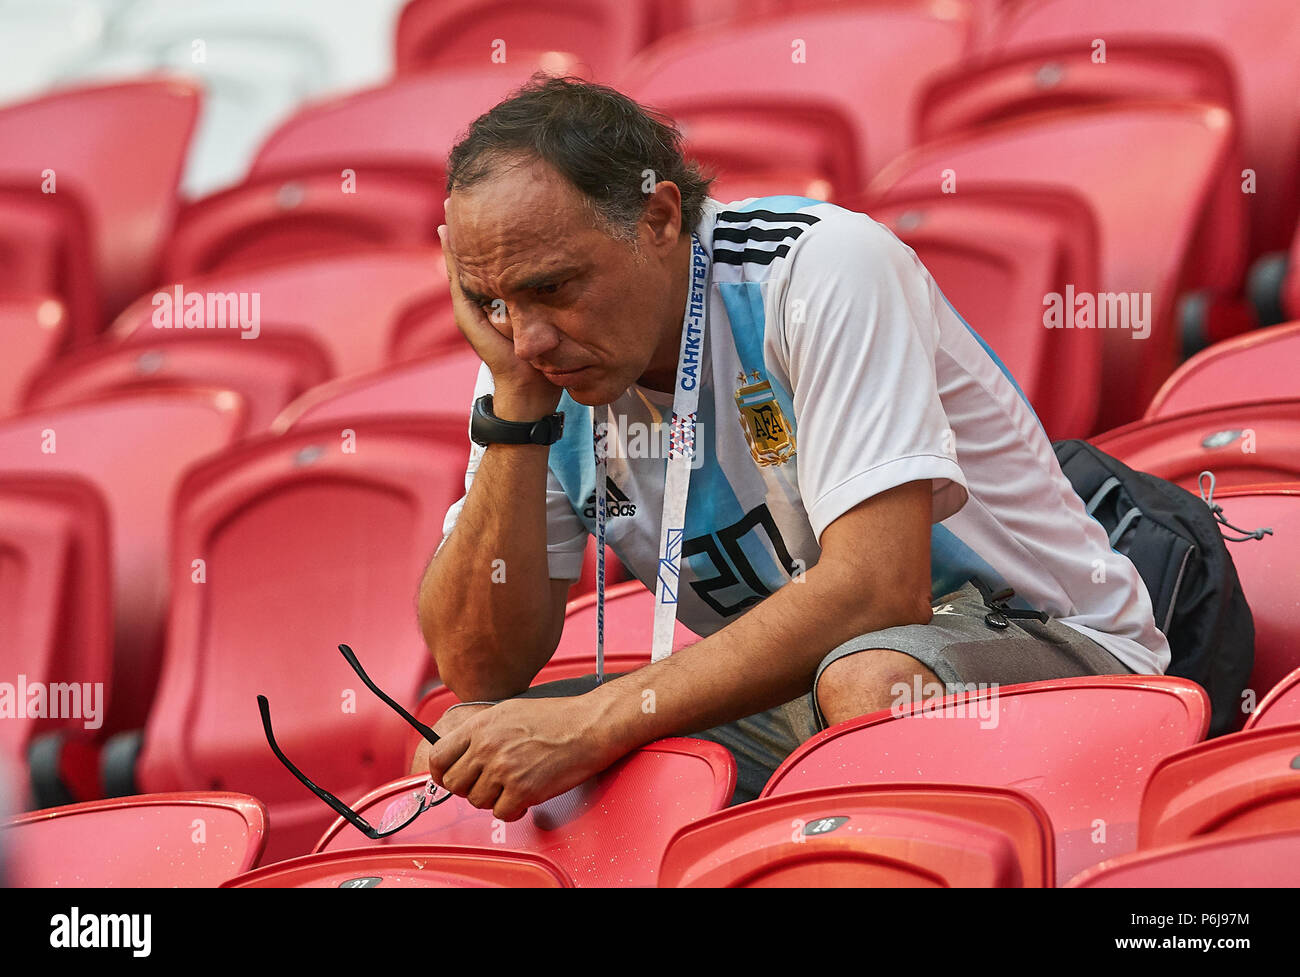 Kazan, Russia, June 30, 2018 argentina fan, sad, disappointed, angry, Emotions, disappointment, frustration, frustrated, sadness, desperate, despair,  ARGENTINA - FRANCE FIFA WORLD CUP 2018 RUSSIA, Best of 16 , Season 2018/2019,  June 30, 2018  Stadium K a z a n - A r e n a in Kazan, Russia. © Peter Schatz / Alamy Live News Stock Photo